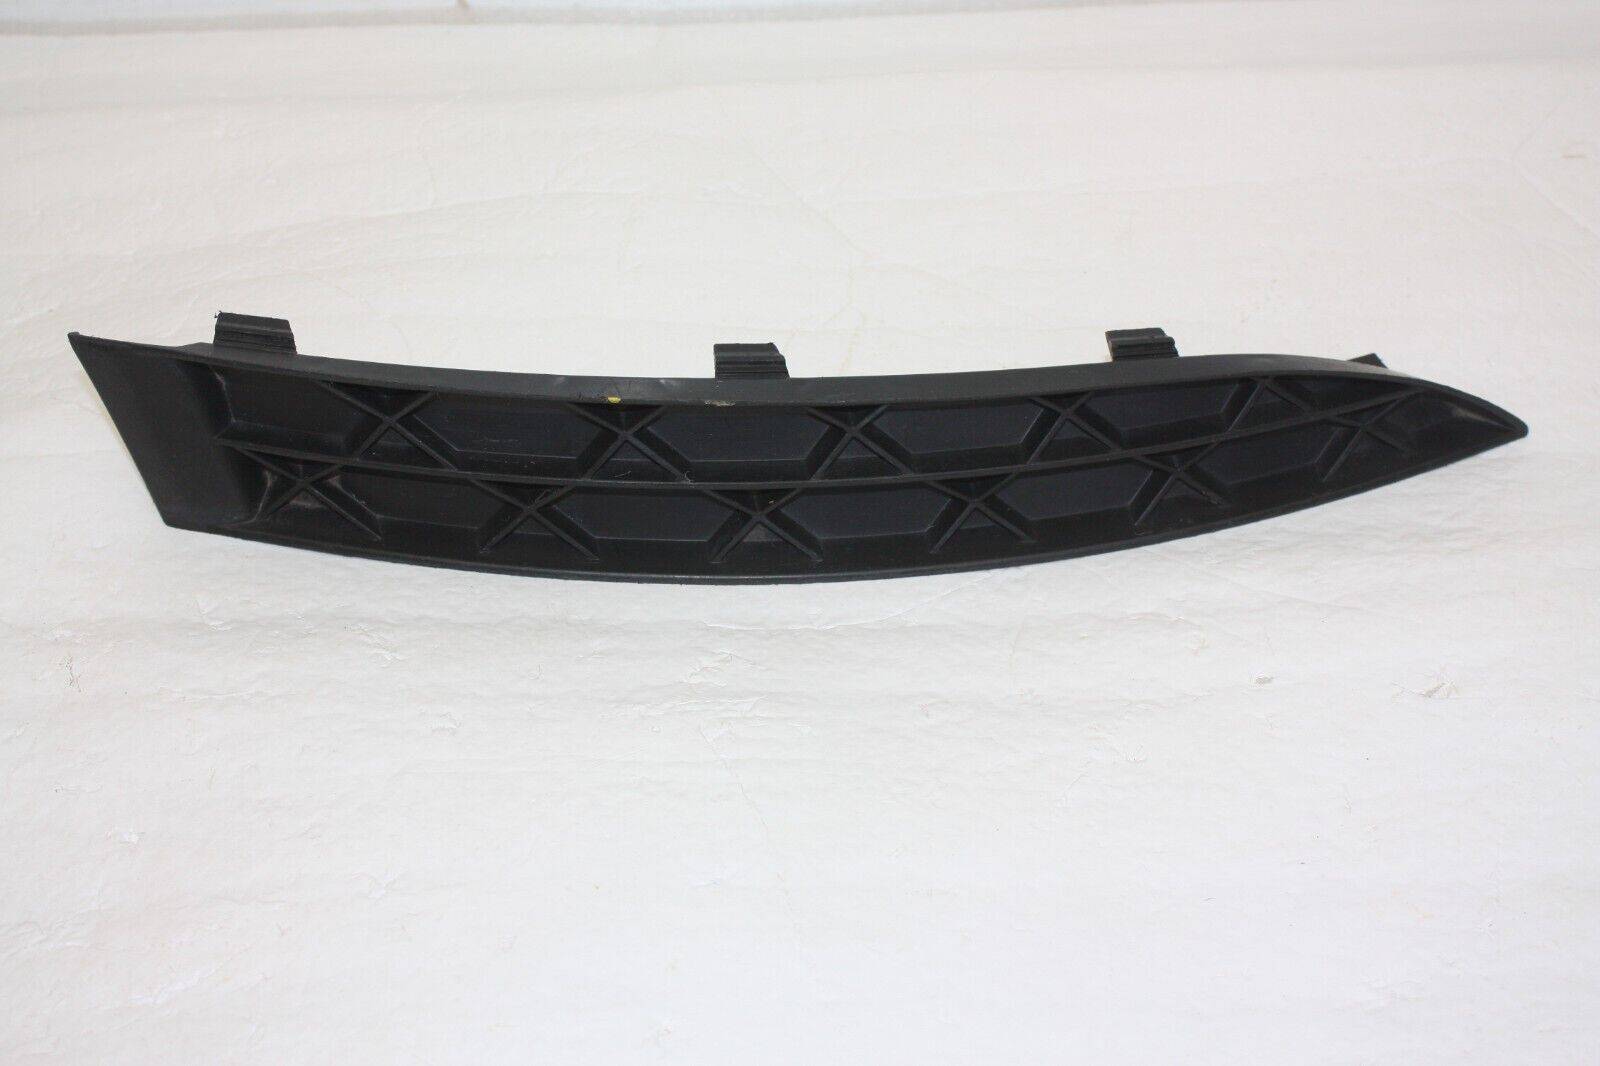 Citroen C4 Picasso Front Bumper Right Lower Grill 2007 TO 2011 9680403277 176254461016